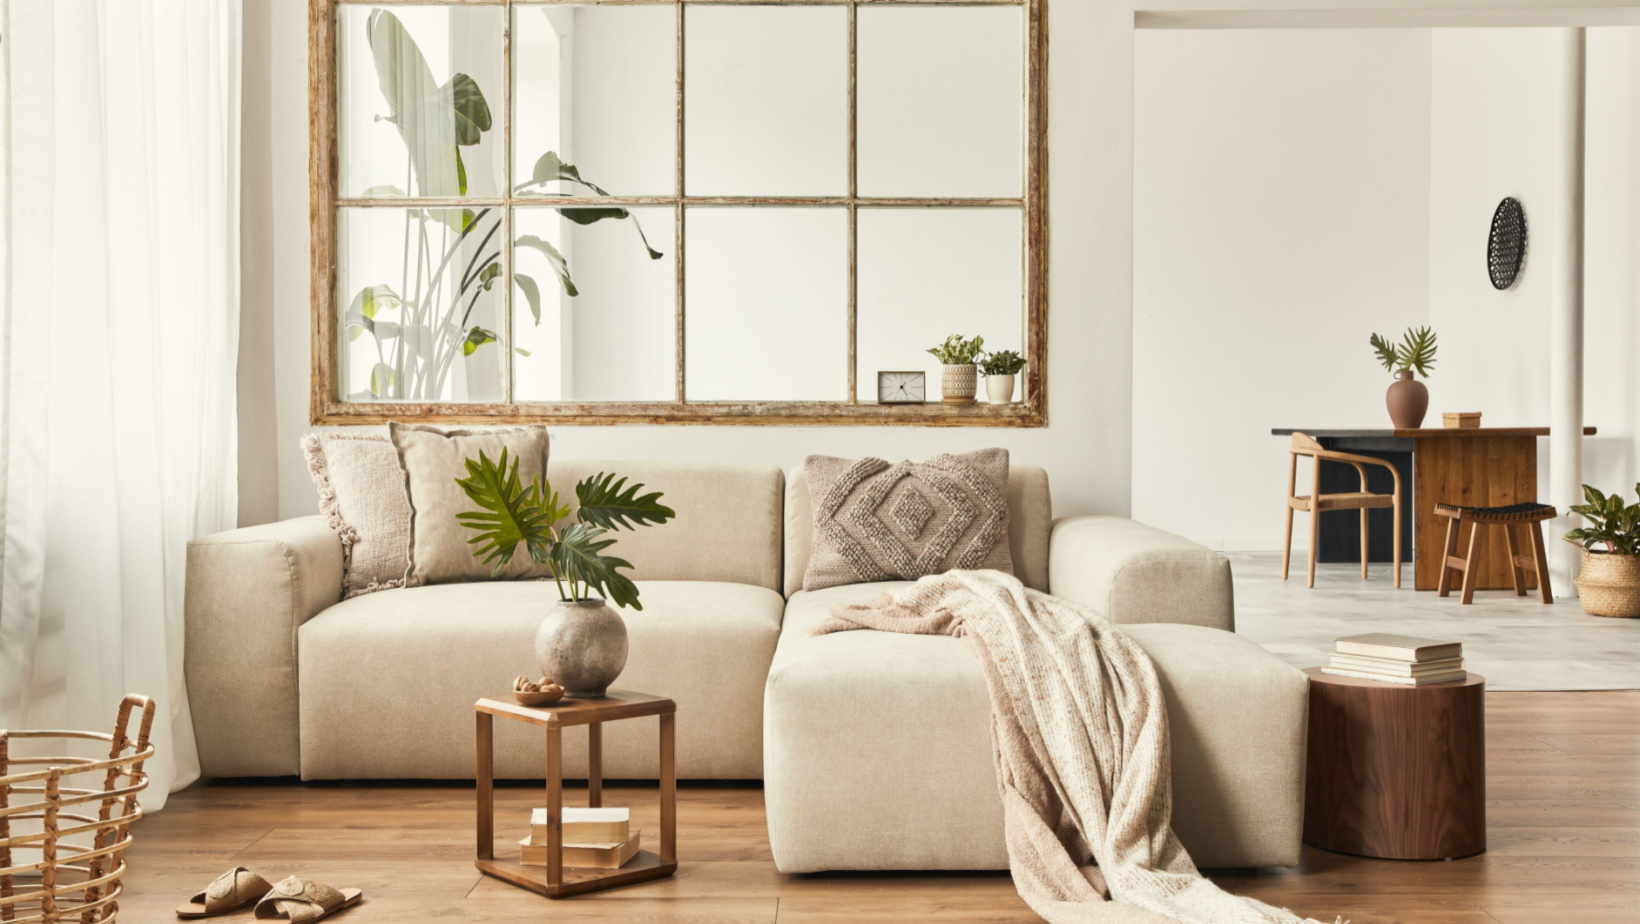 Furnishing an Apartment: 5 Tips for Choosing the Best Furniture - FF&E